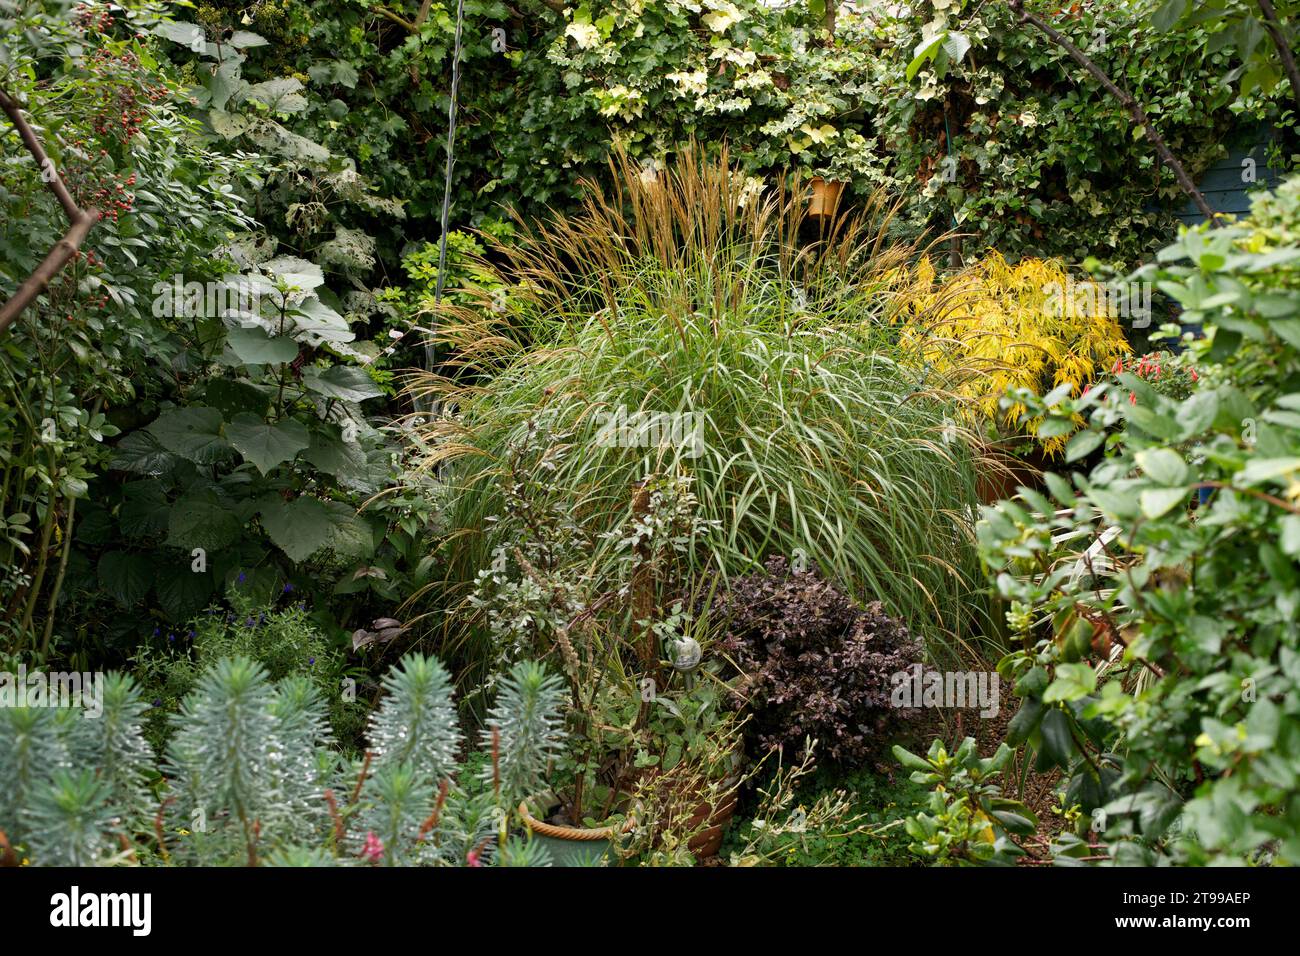 Lush suburban garden in London in the early autumn: Miscanthus Yakushima Dwarf taking centre stage. Other plants include  Euphorbia characias wulfenii Stock Photo